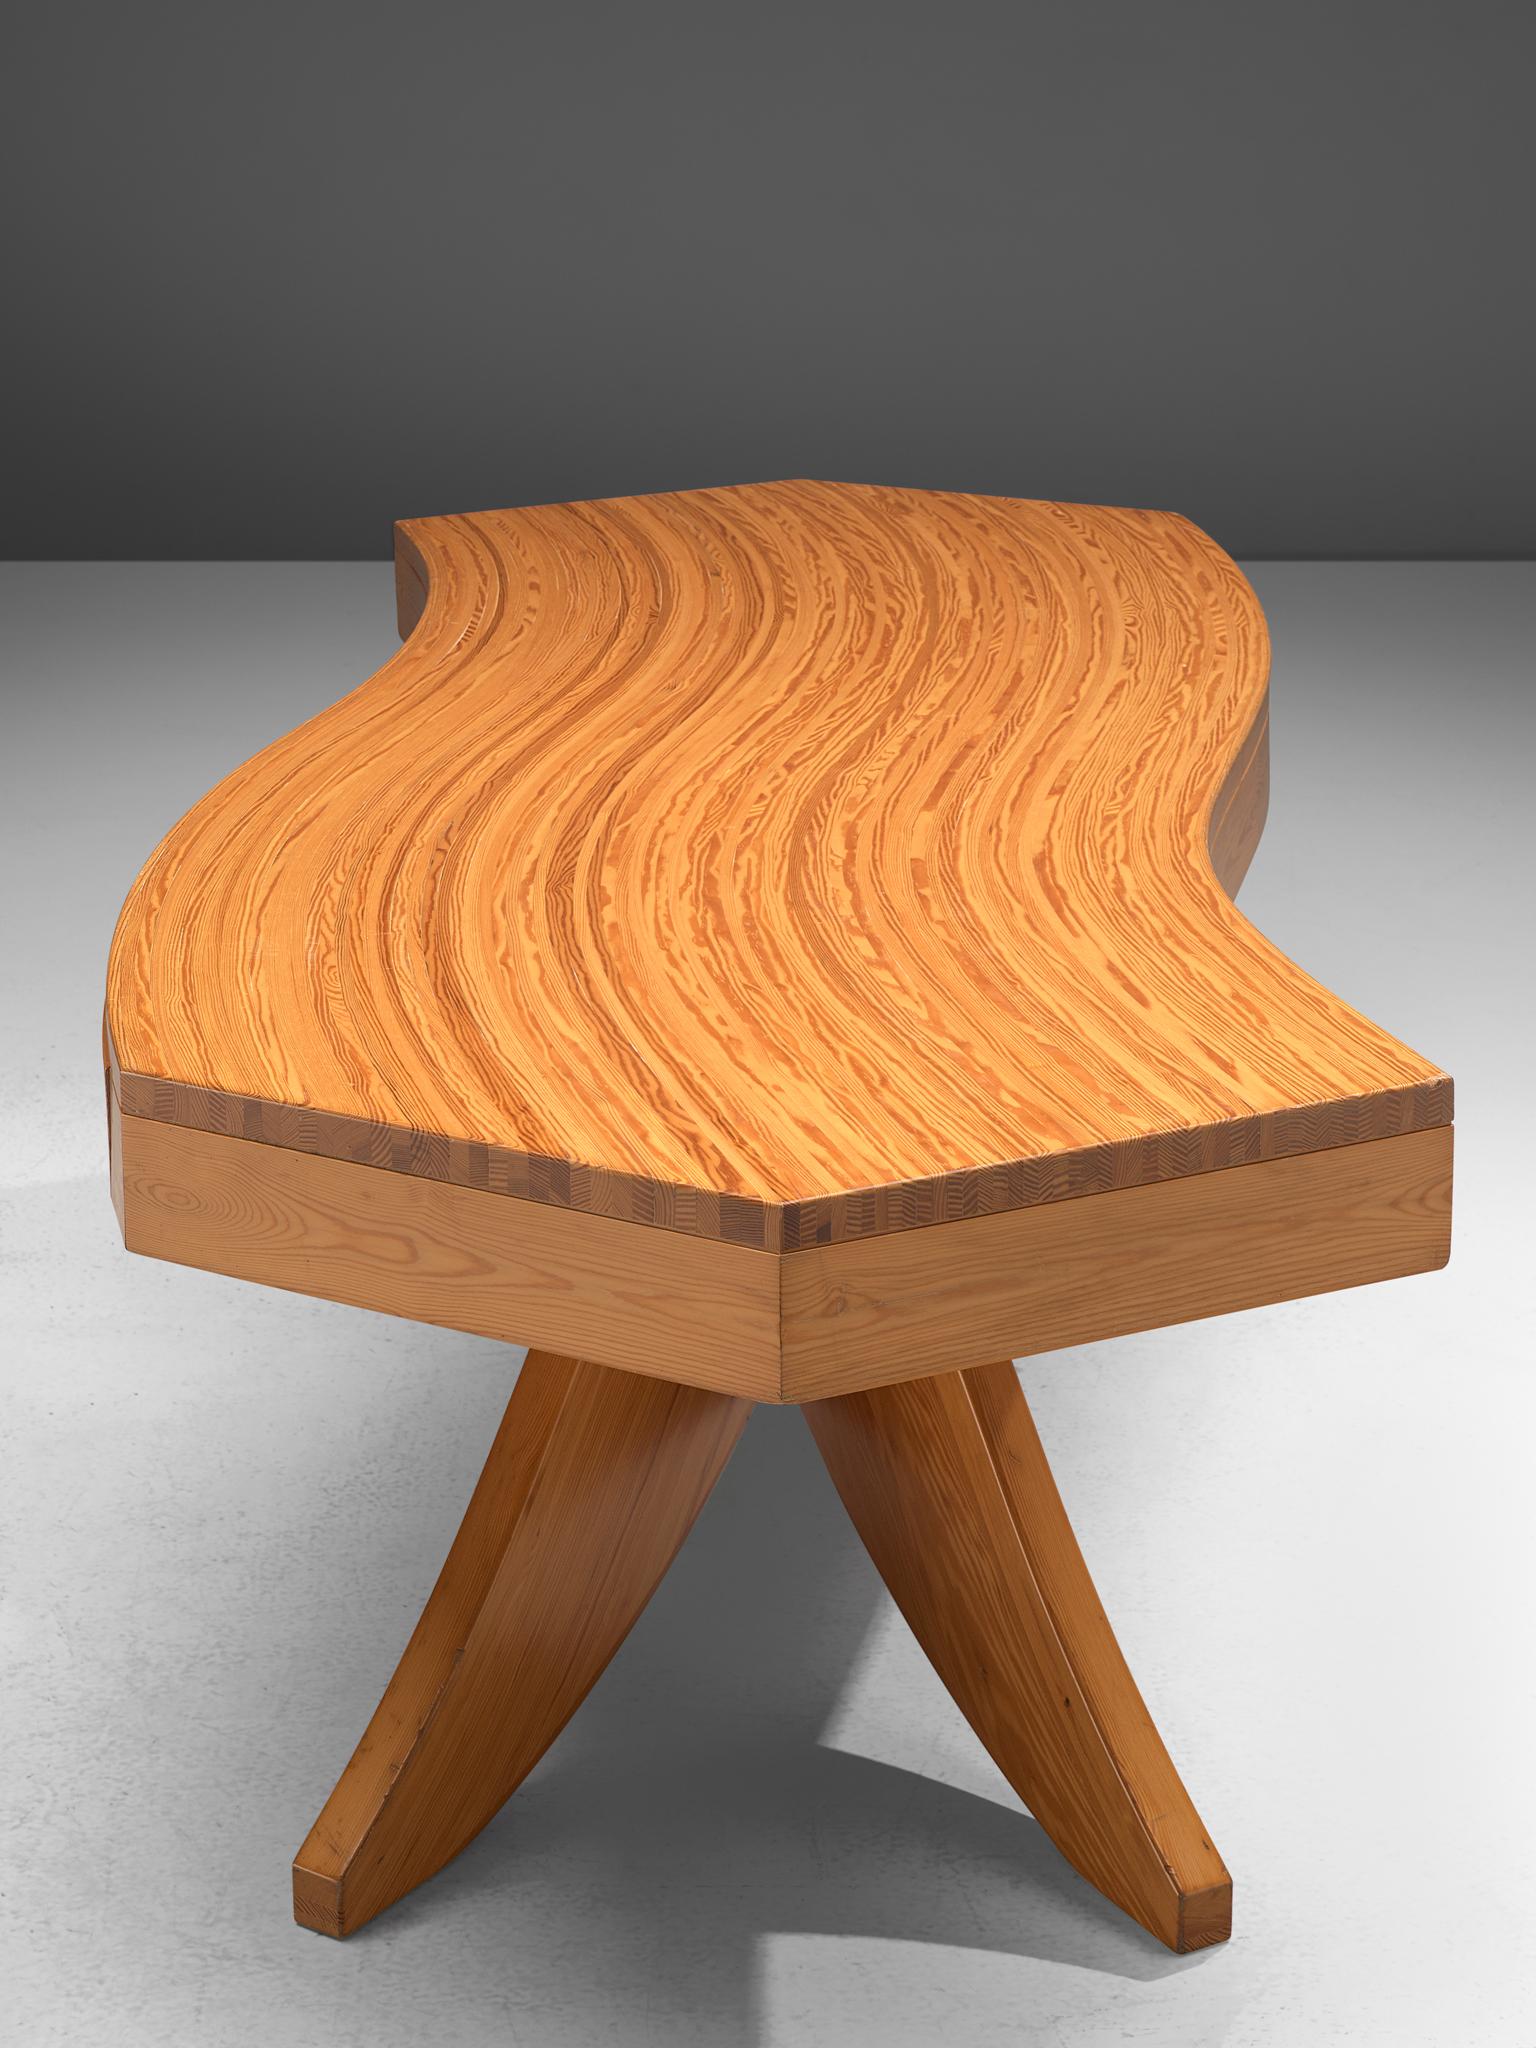 Scandinavian Pine Table with Curved Table Top 1